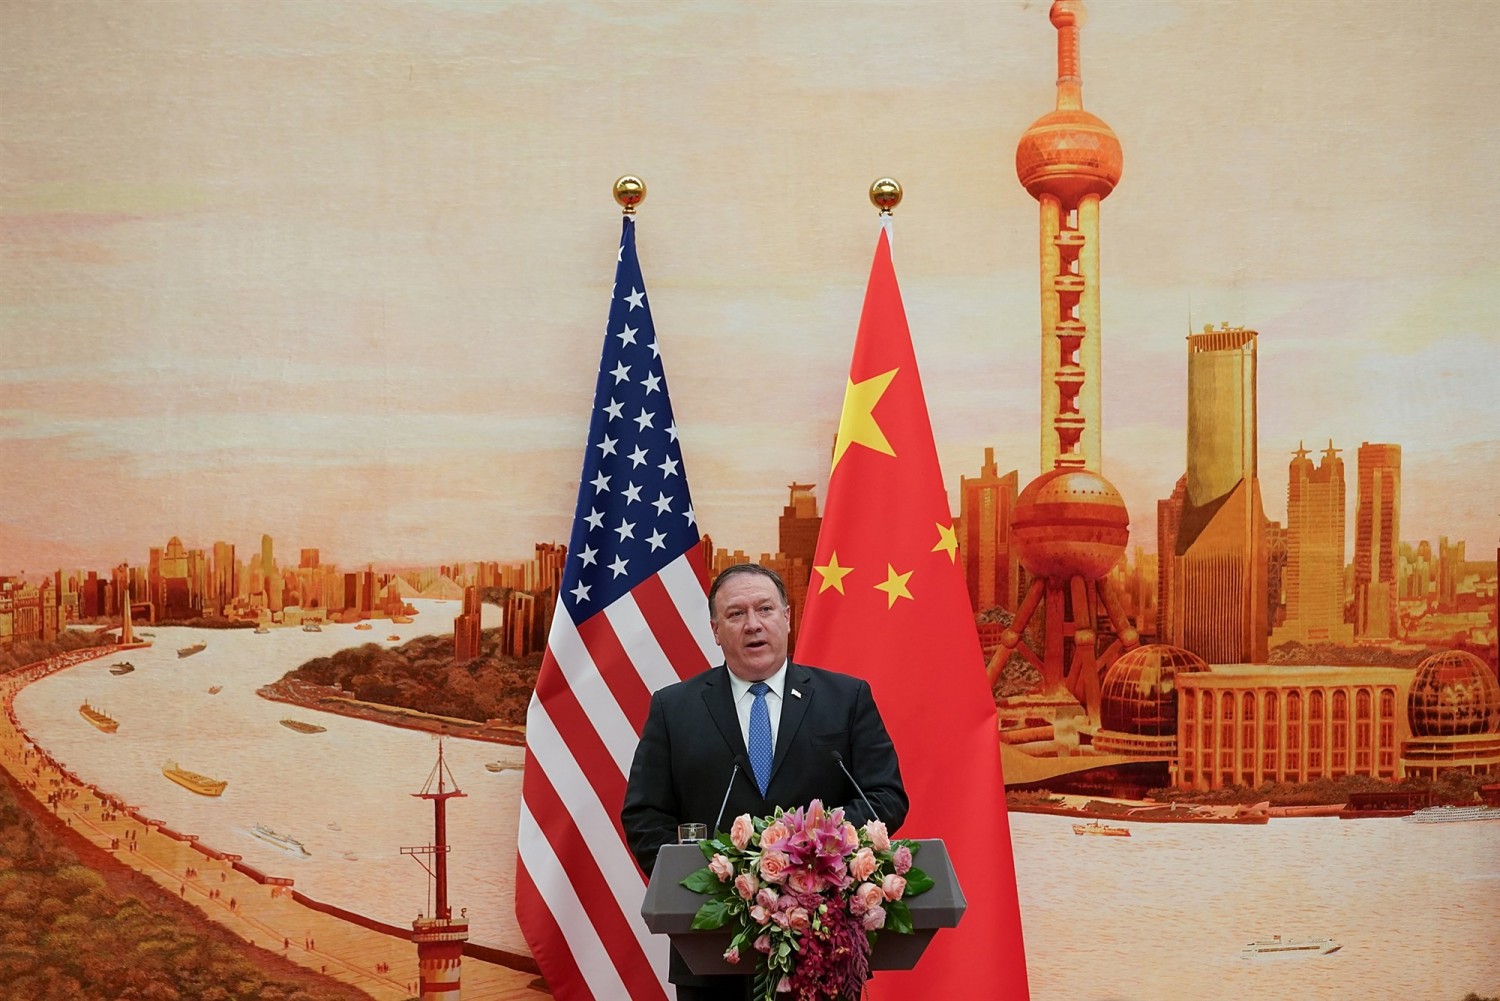 Secretary of State Mike Pompeo, in Beijing in 2018. High-profile data breaches at U.S. companies over the last decade have been traced back to China.Lintao Zhang / Getty Images